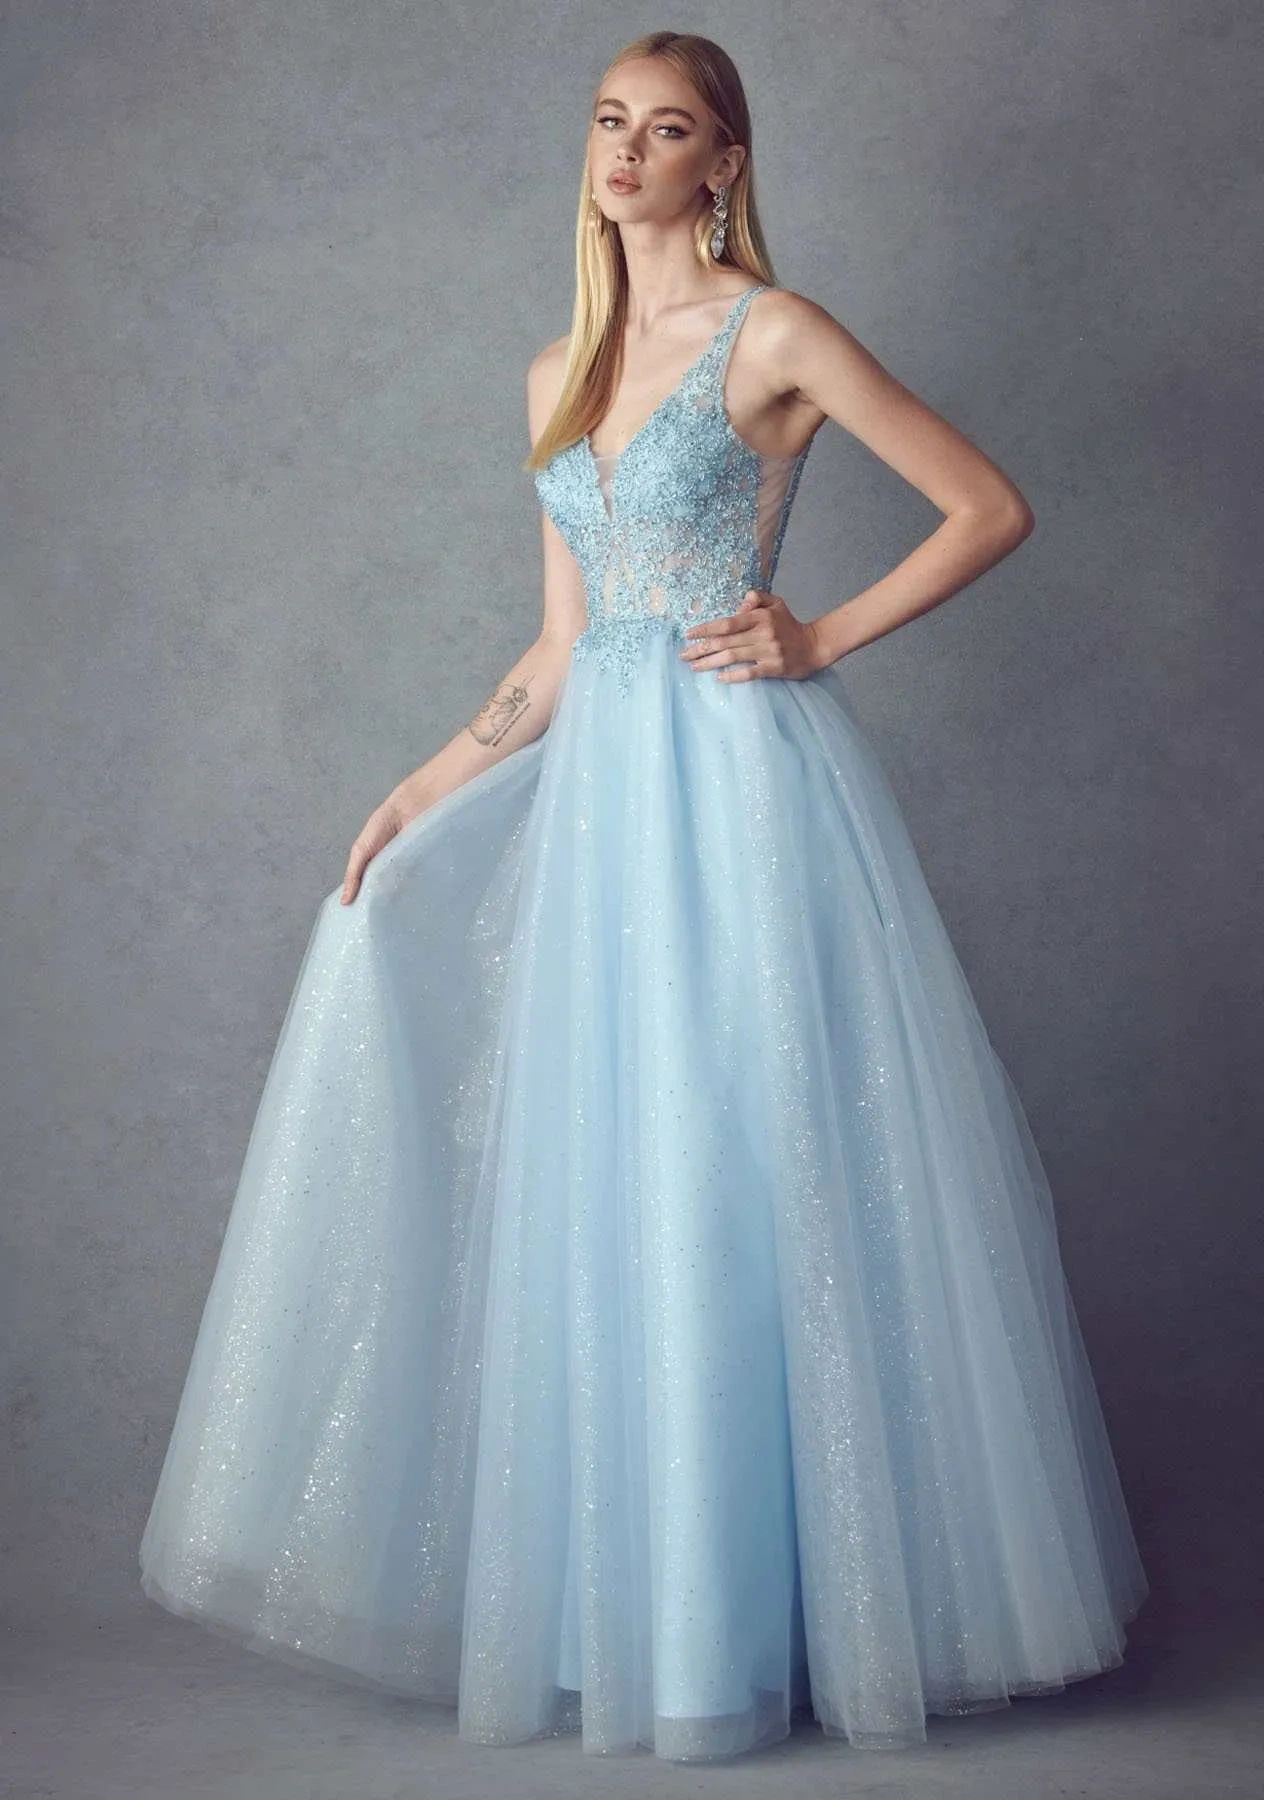 over 500 prom dresses in stock 